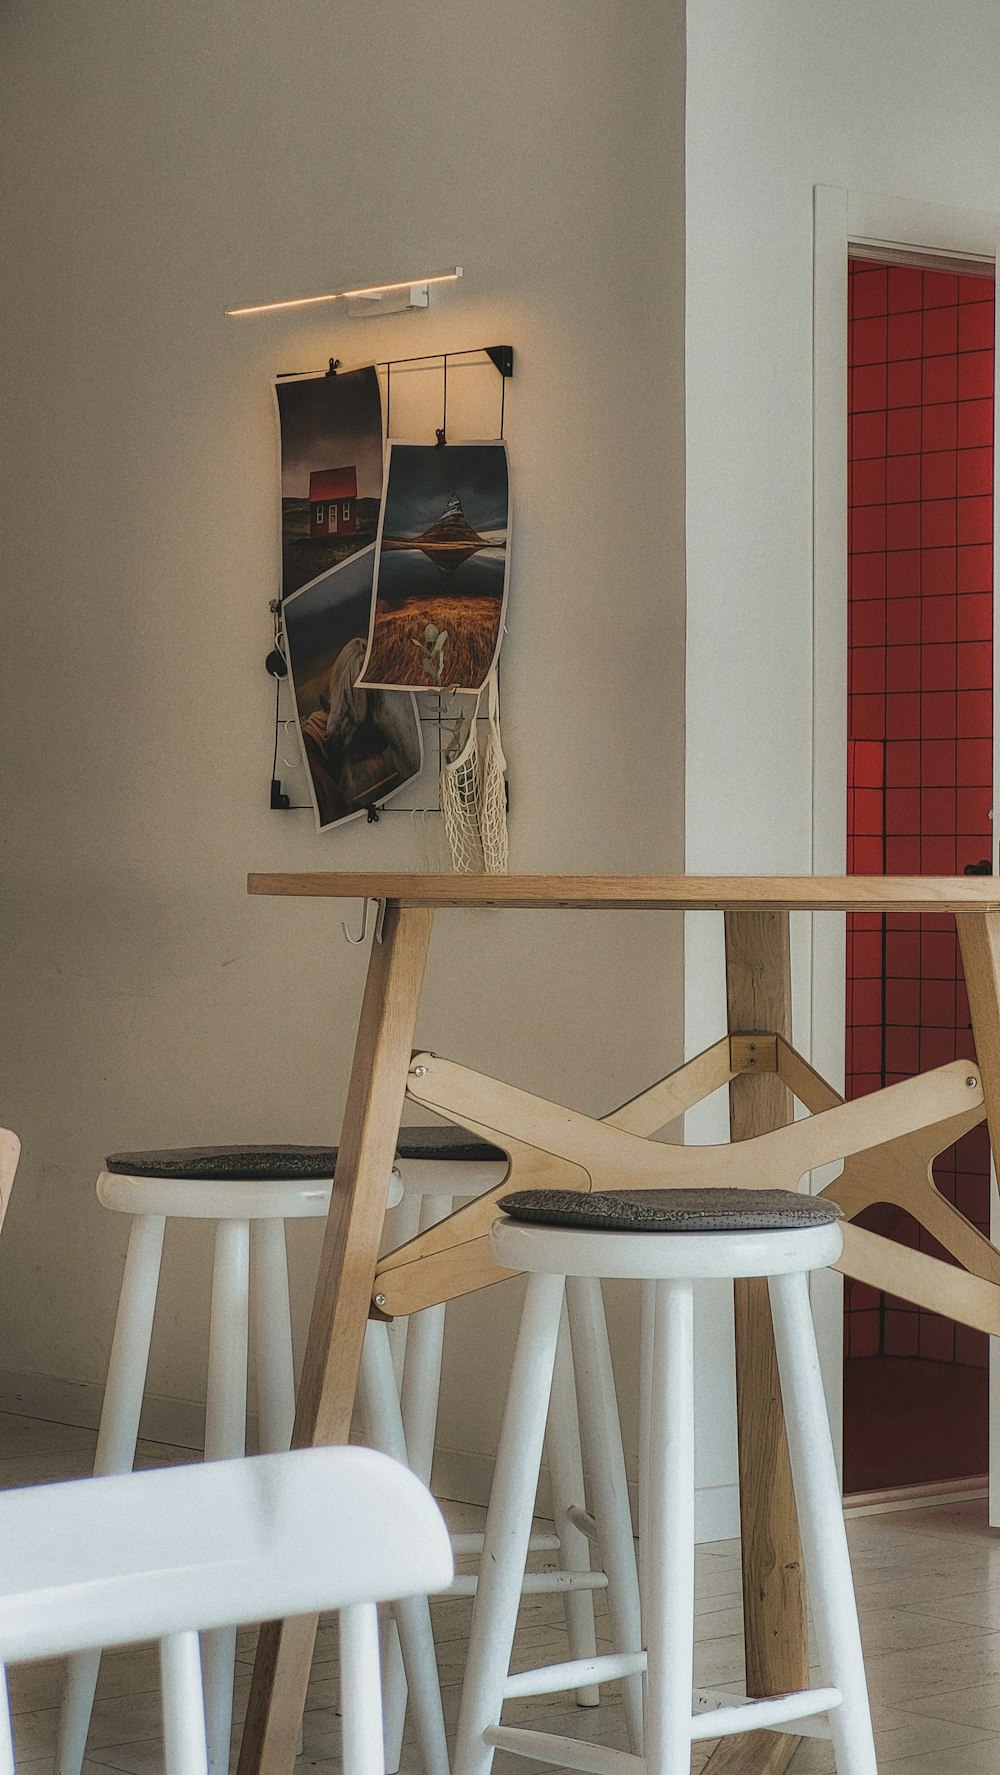 a table with stools and a shelf with objects on it